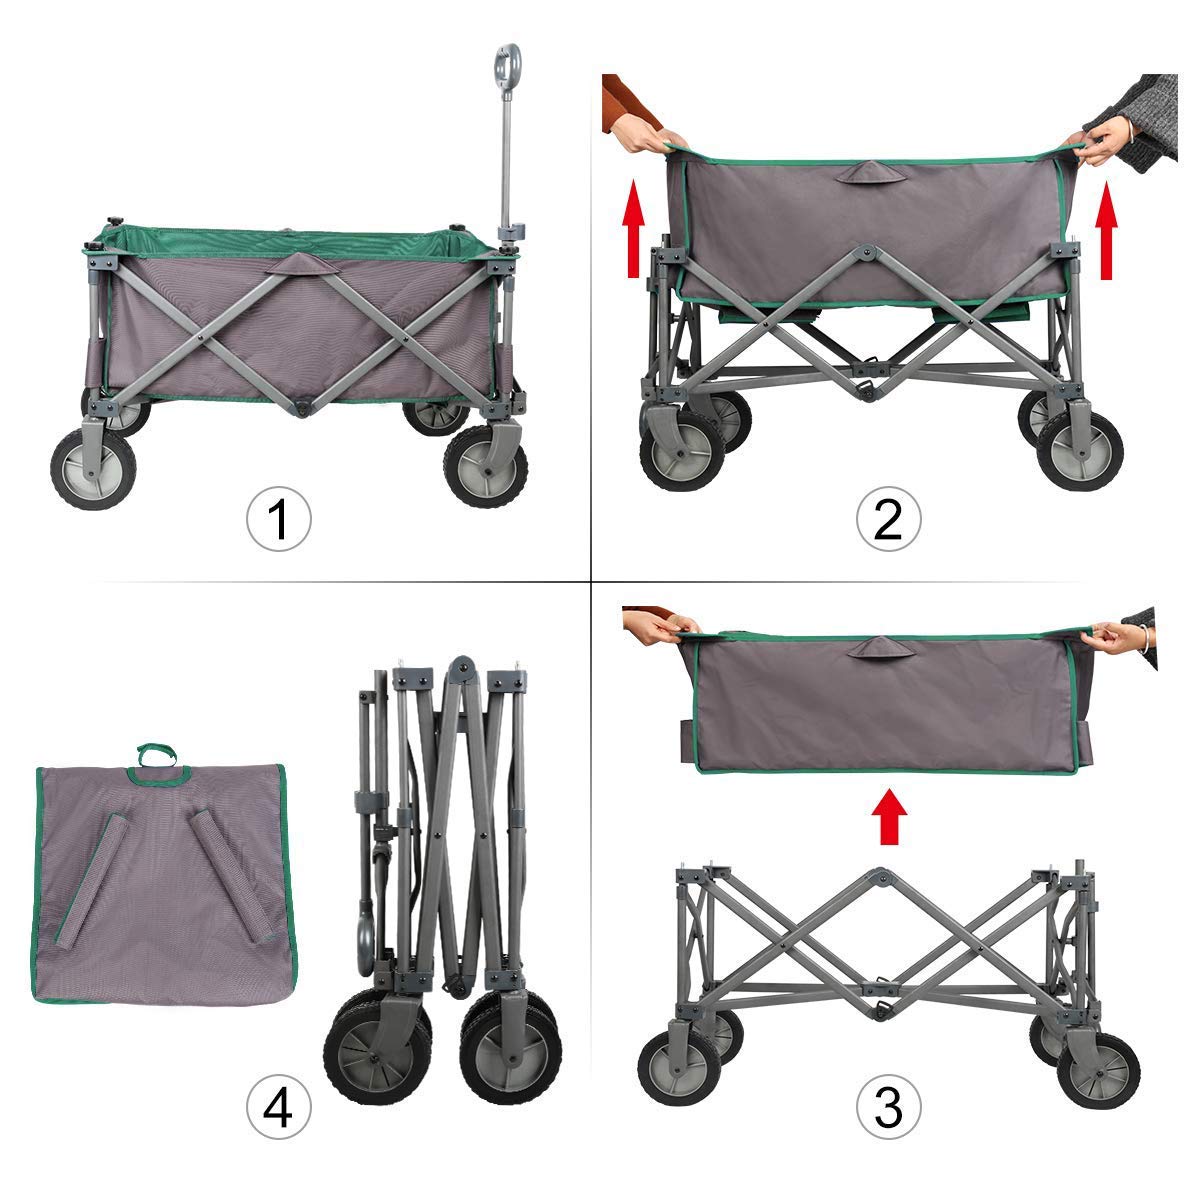 PORTAL Collapsible Folding Utility Wagon Quad Compact Outdoor Garden Camping Cart with Removable Fabric, Support up to 225 lbs (Grey/Green)